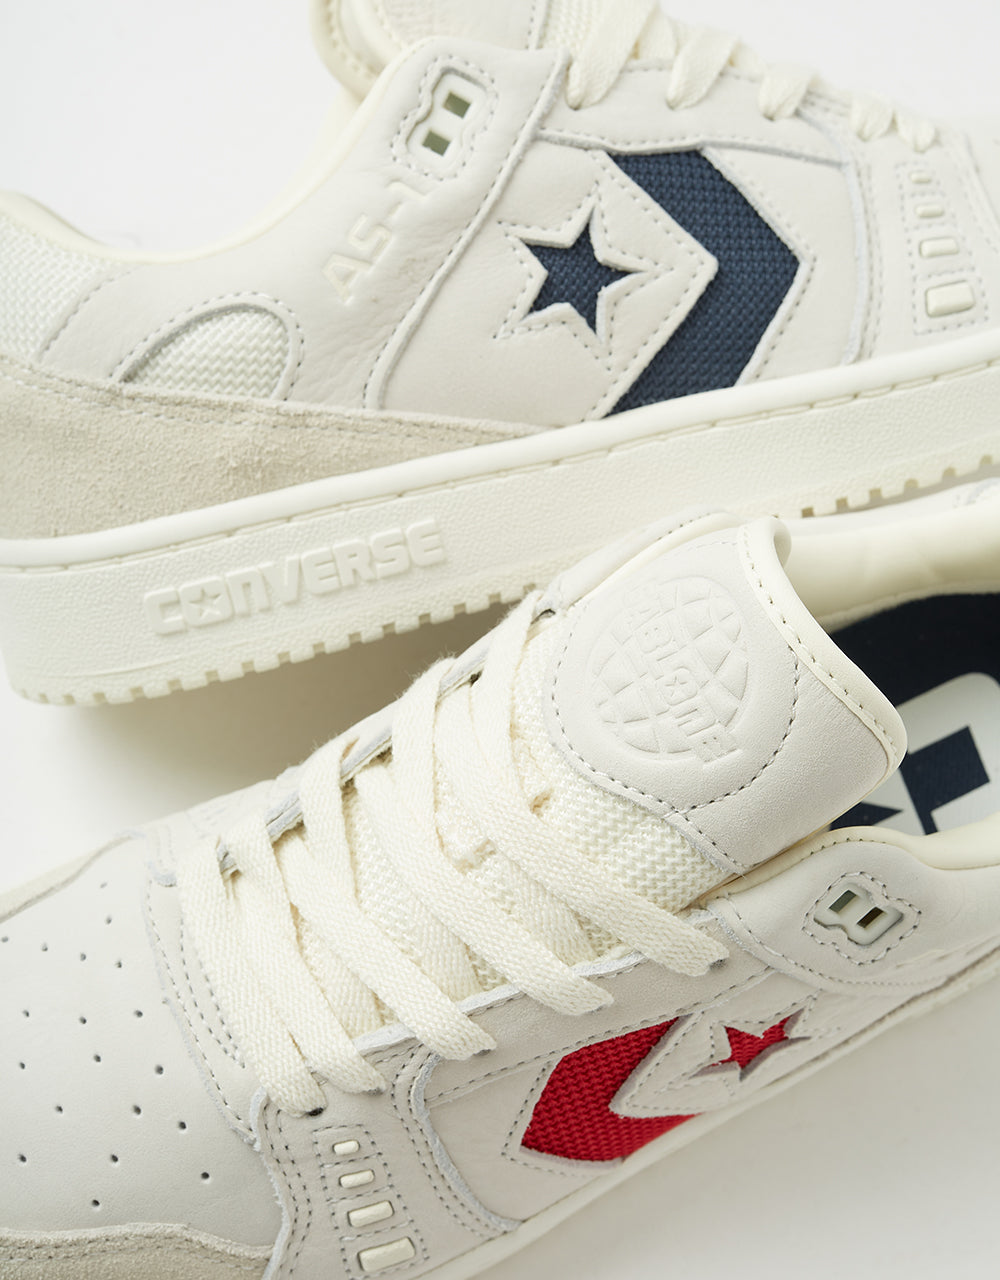 Converse AS-1 Pro Skate Shoes - Egret/Navy/Red